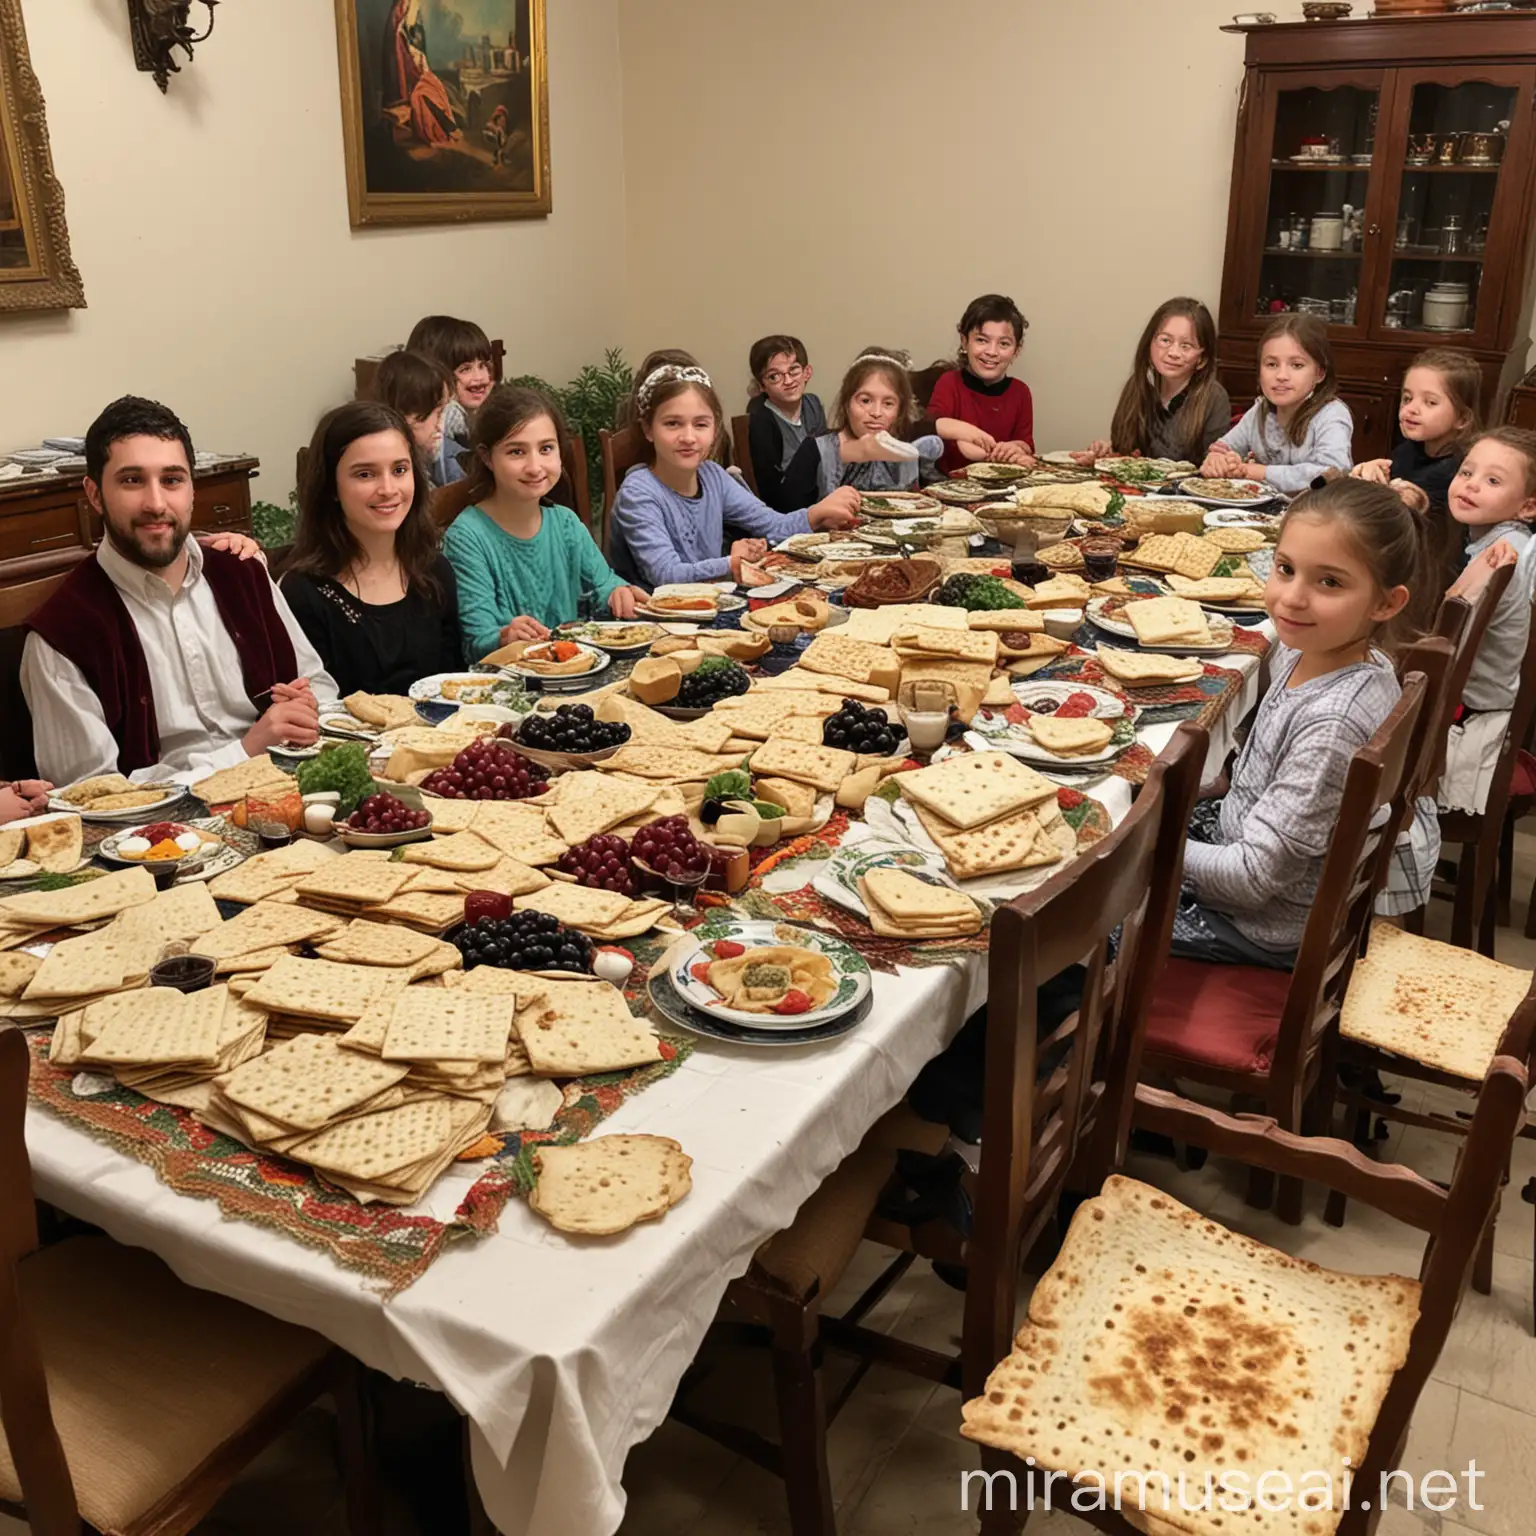 Family Gathering for Passover Seder at a Large Table